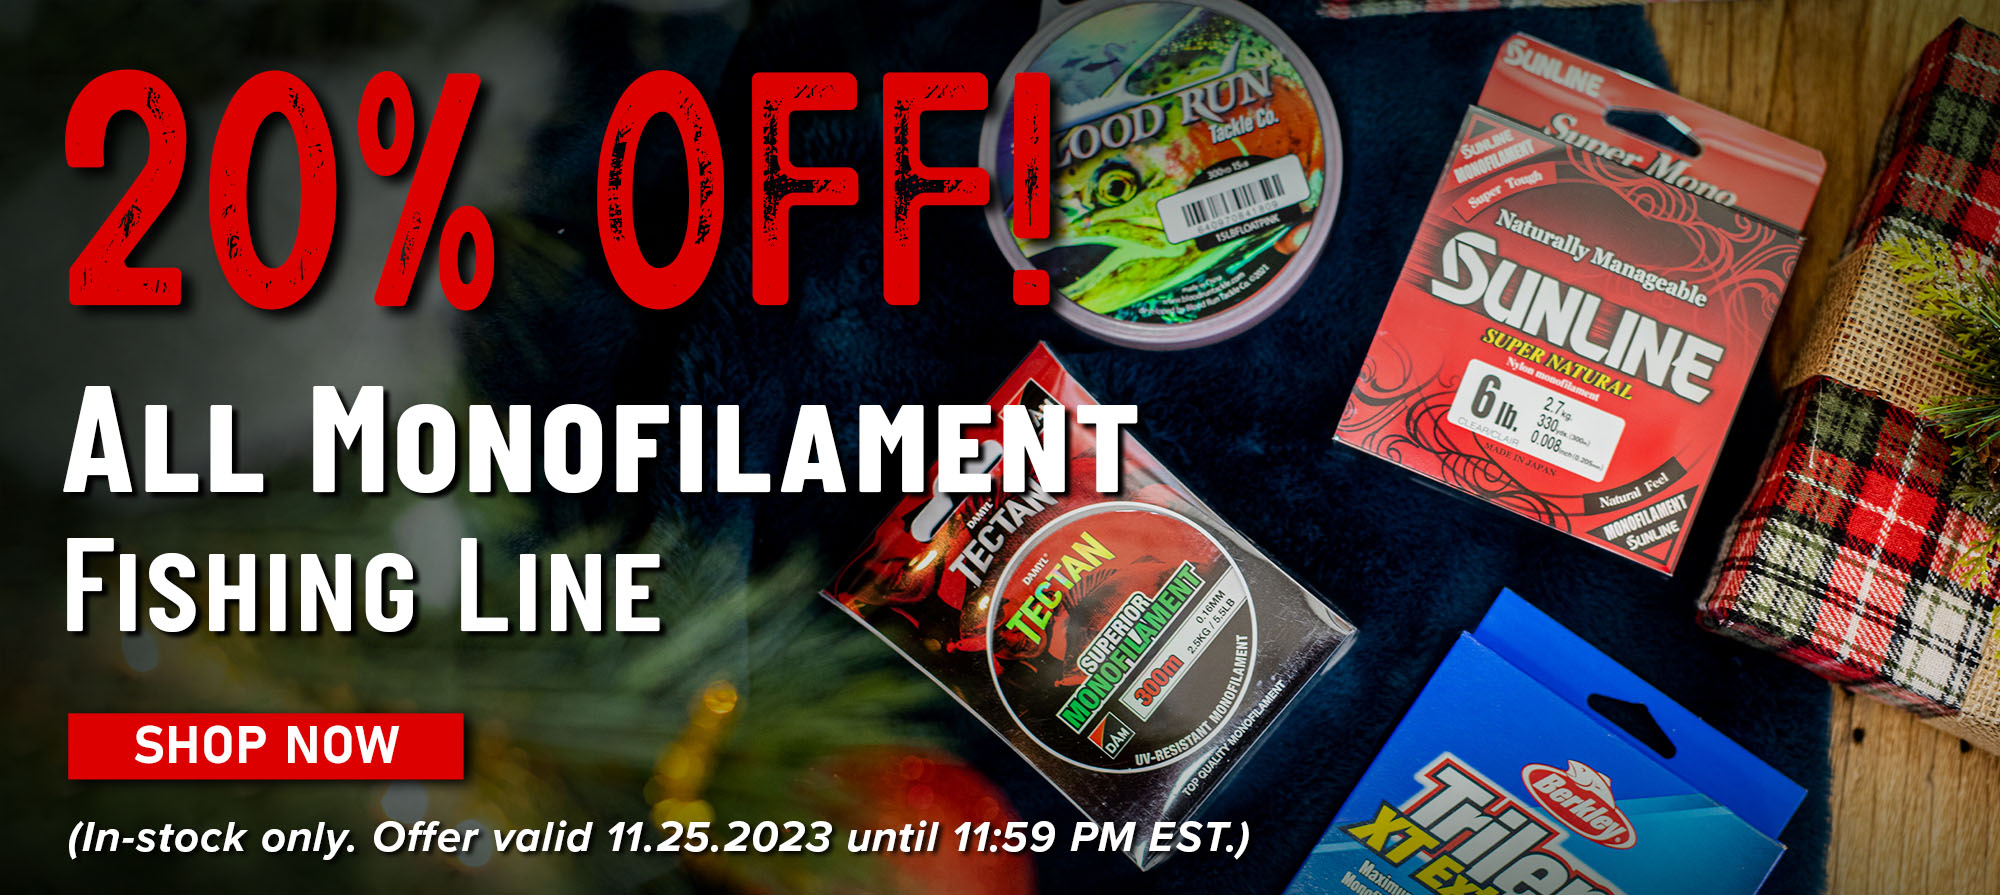 20% Off! All Monofilament Line Shop Now (In-stock only. Offer valid 11.25.2023 until 11:59 PM EST.)